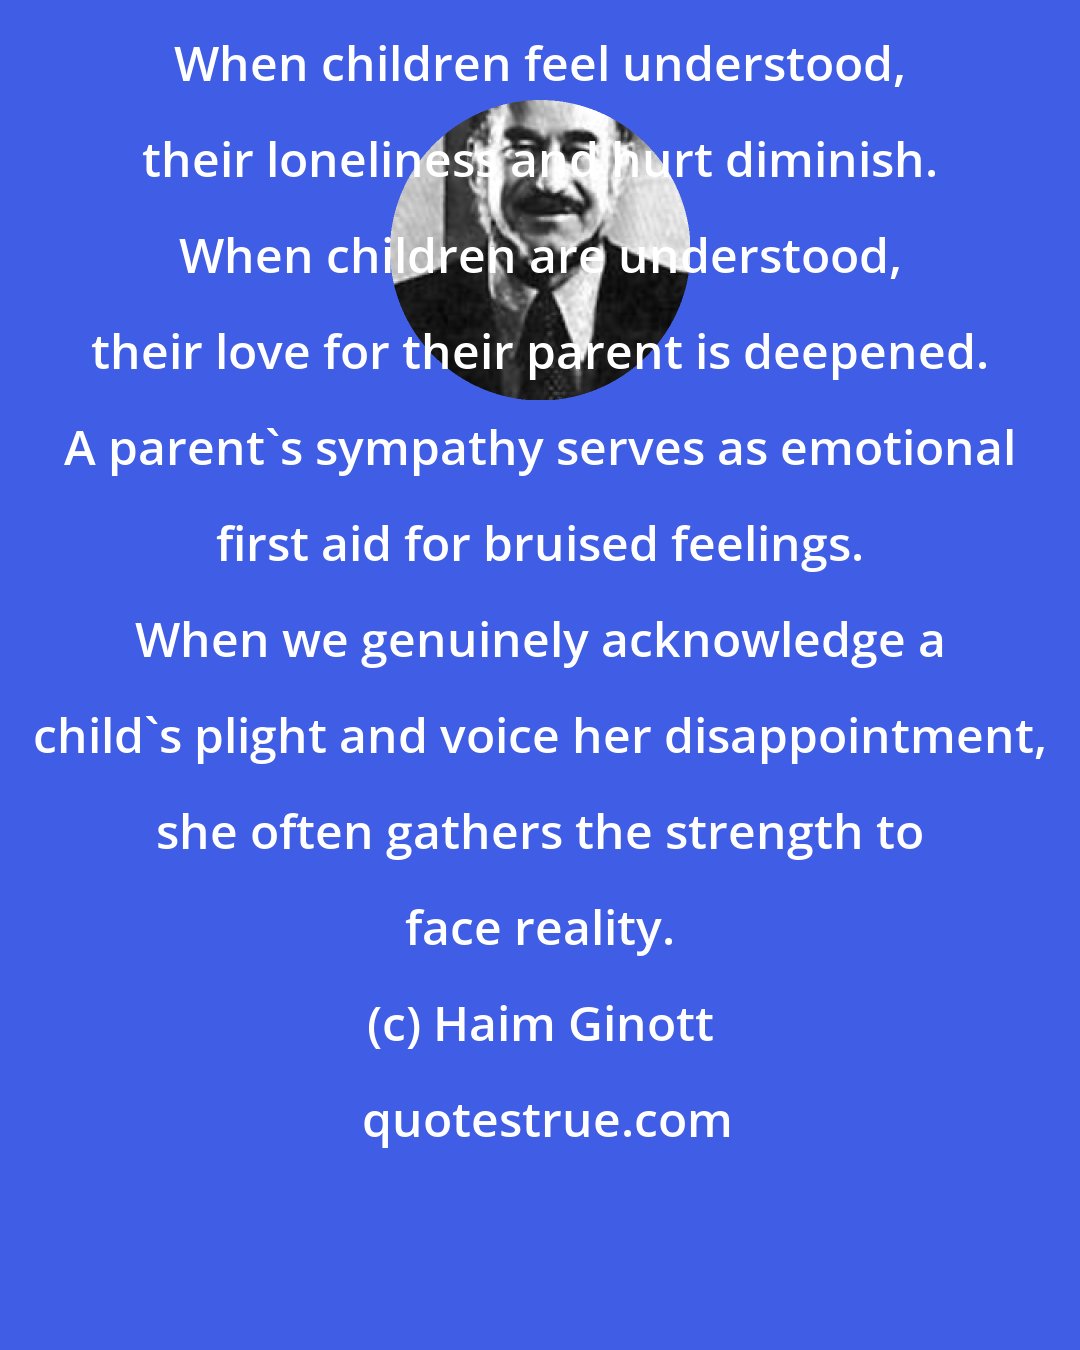 Haim Ginott: When children feel understood, their loneliness and hurt diminish. When children are understood, their love for their parent is deepened. A parent's sympathy serves as emotional first aid for bruised feelings. When we genuinely acknowledge a child's plight and voice her disappointment, she often gathers the strength to face reality.